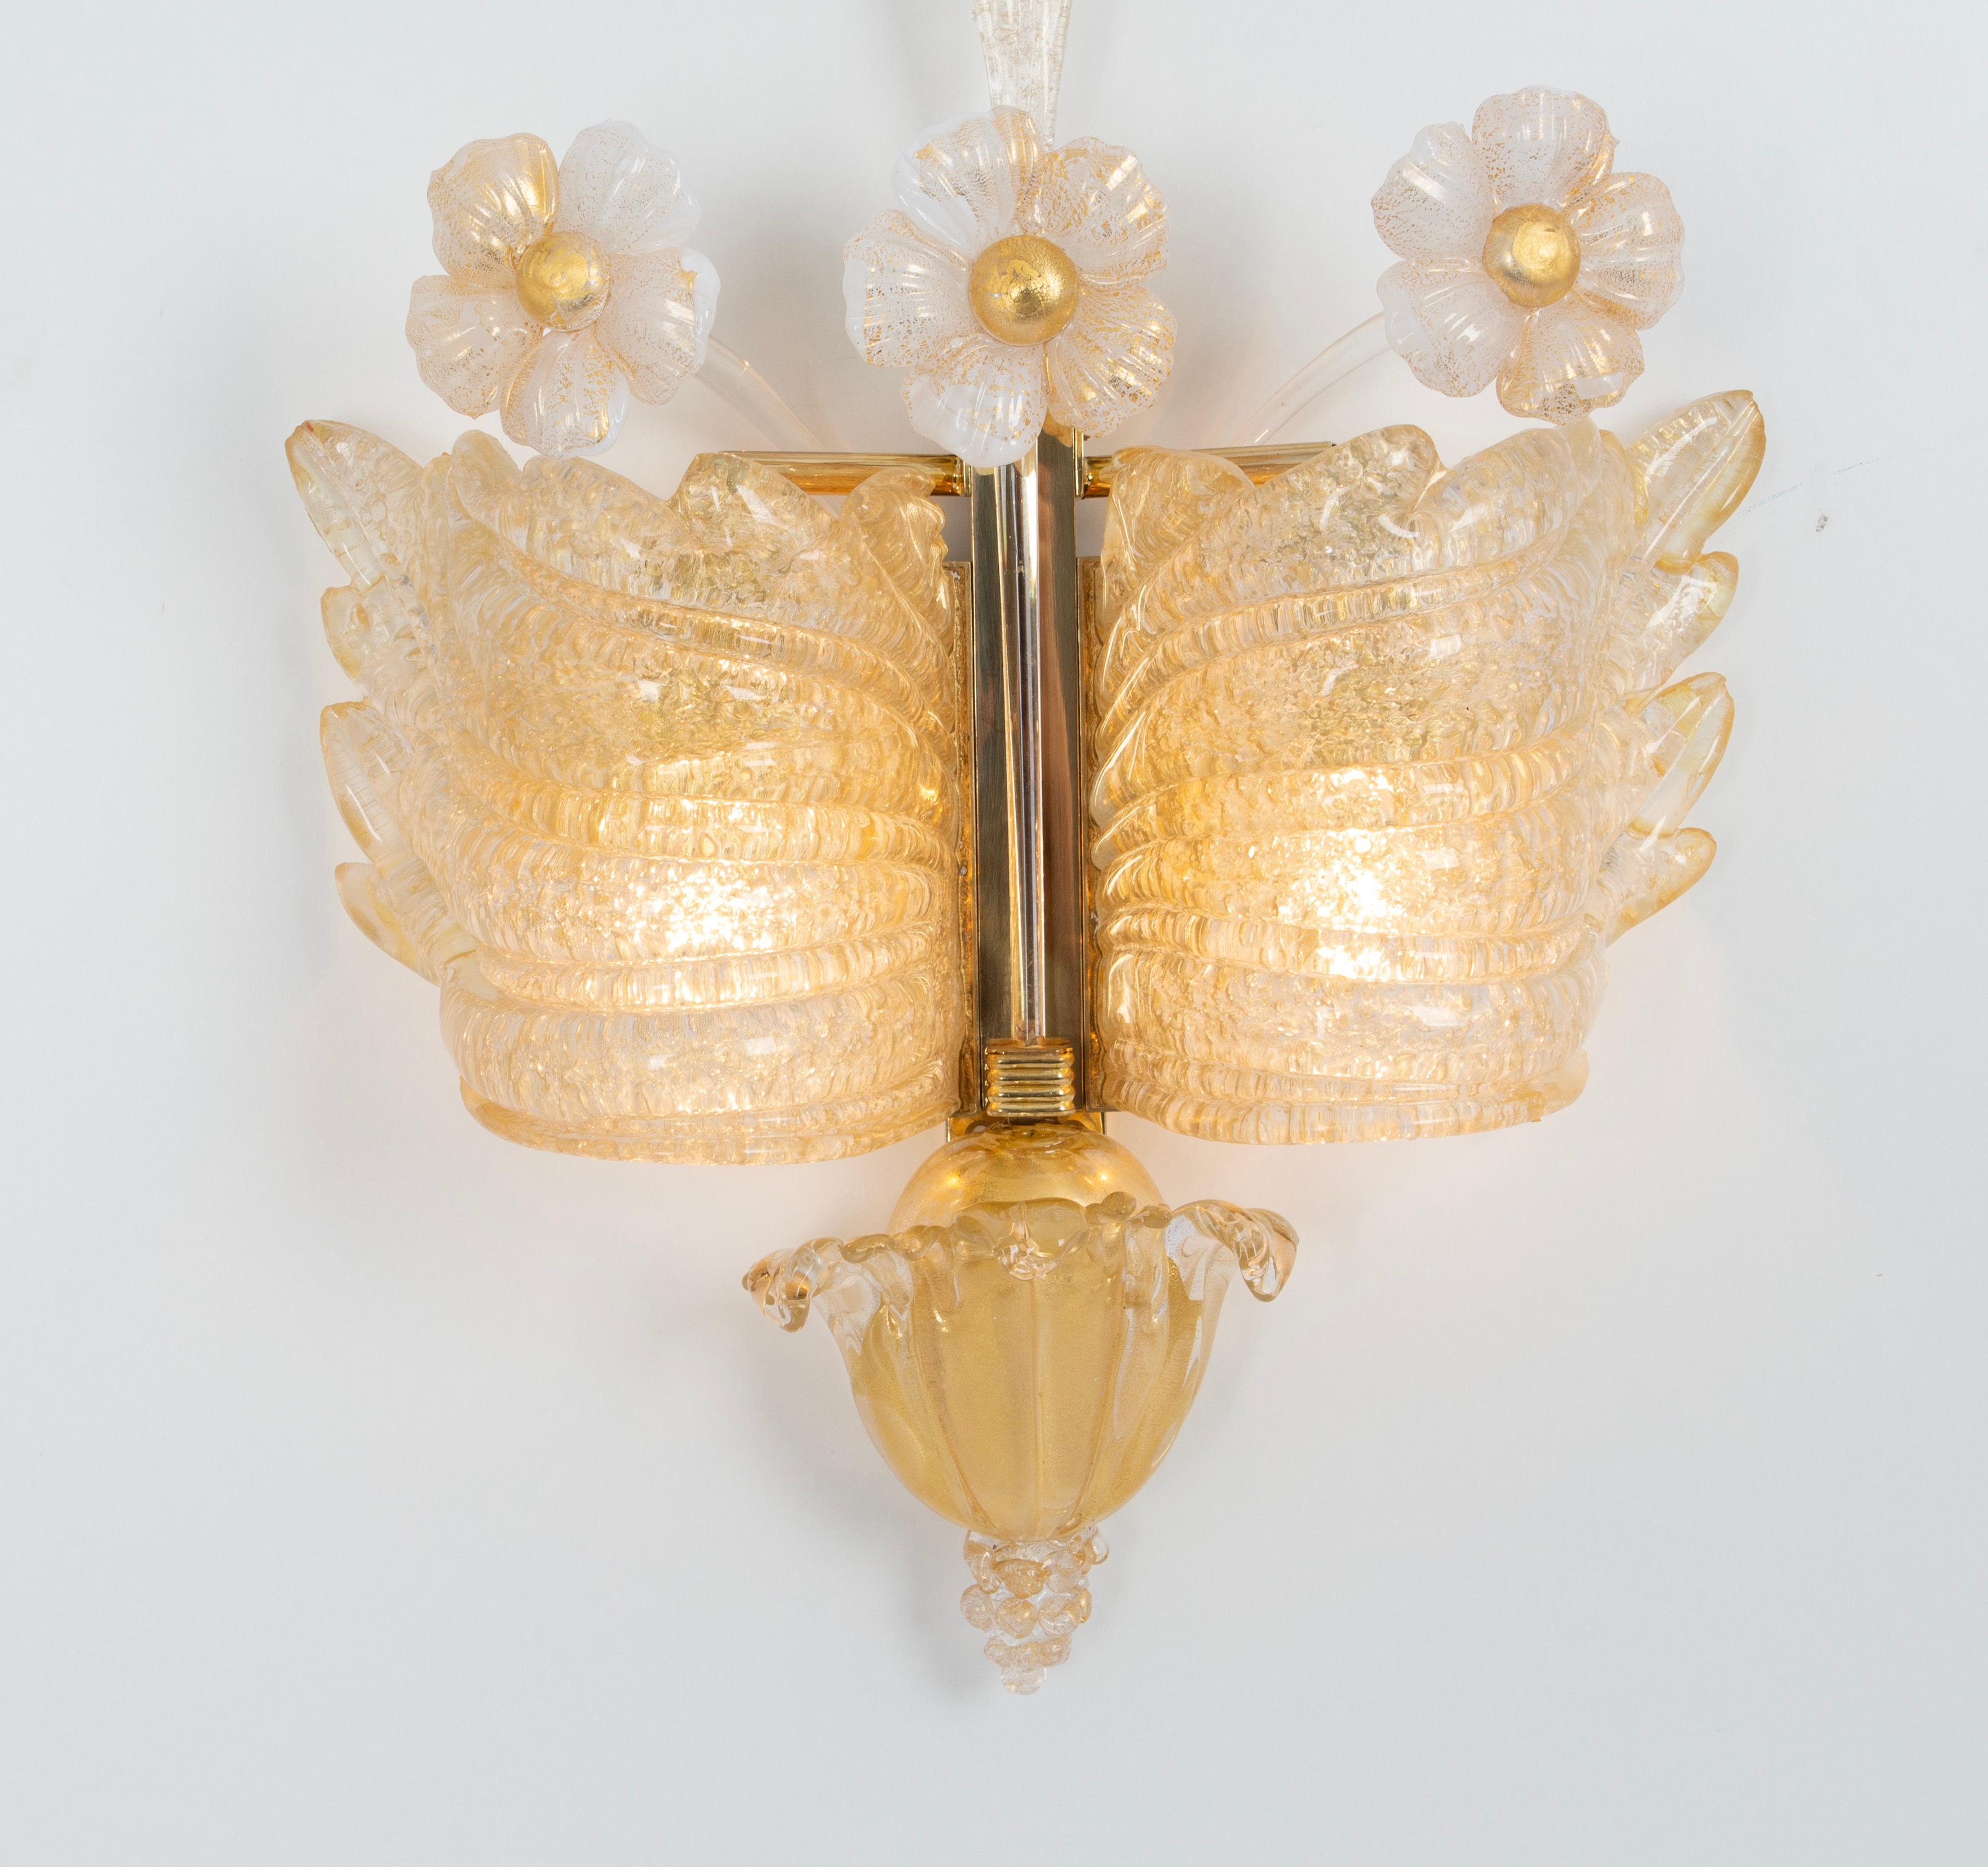 Pair of Large Murano Glass Wall Sconces by Barovier & Toso, Italy, 1970s For Sale 8